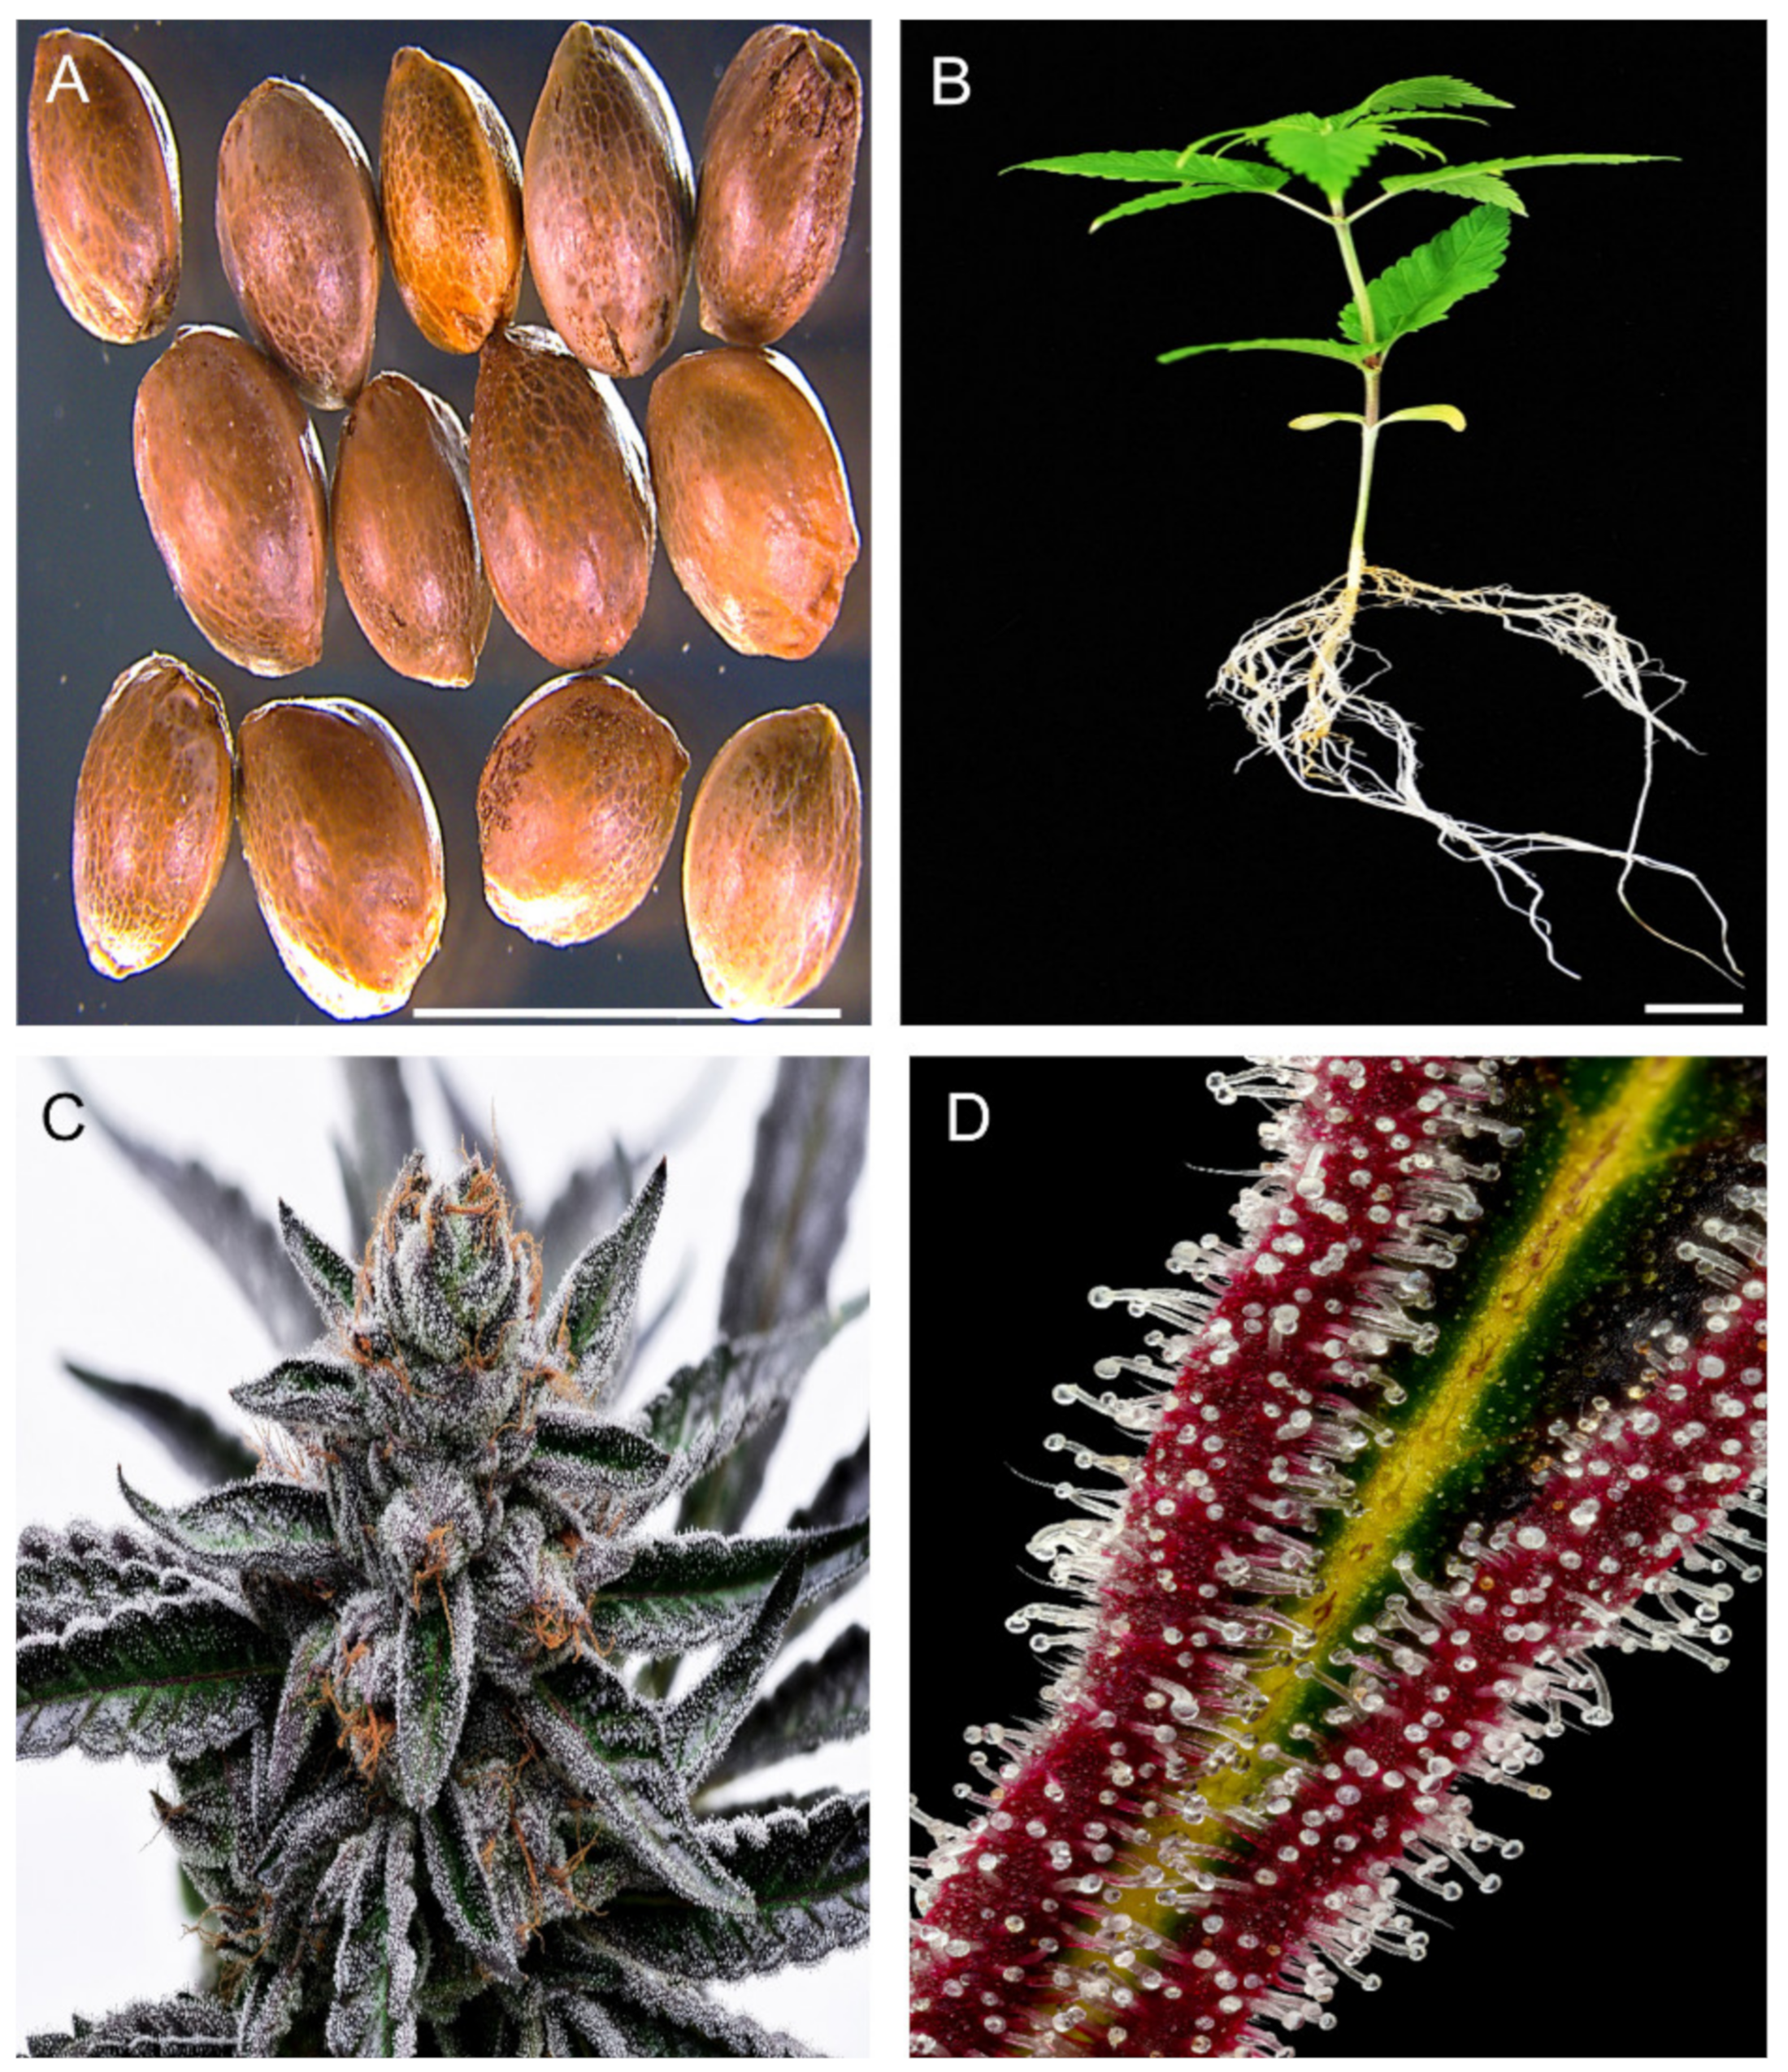 Plants | Free Full-Text | Understanding Cannabis sativa L.: Current Status  of Propagation, Use, Legalization, and Haploid-Inducer-Mediated Genetic  Engineering